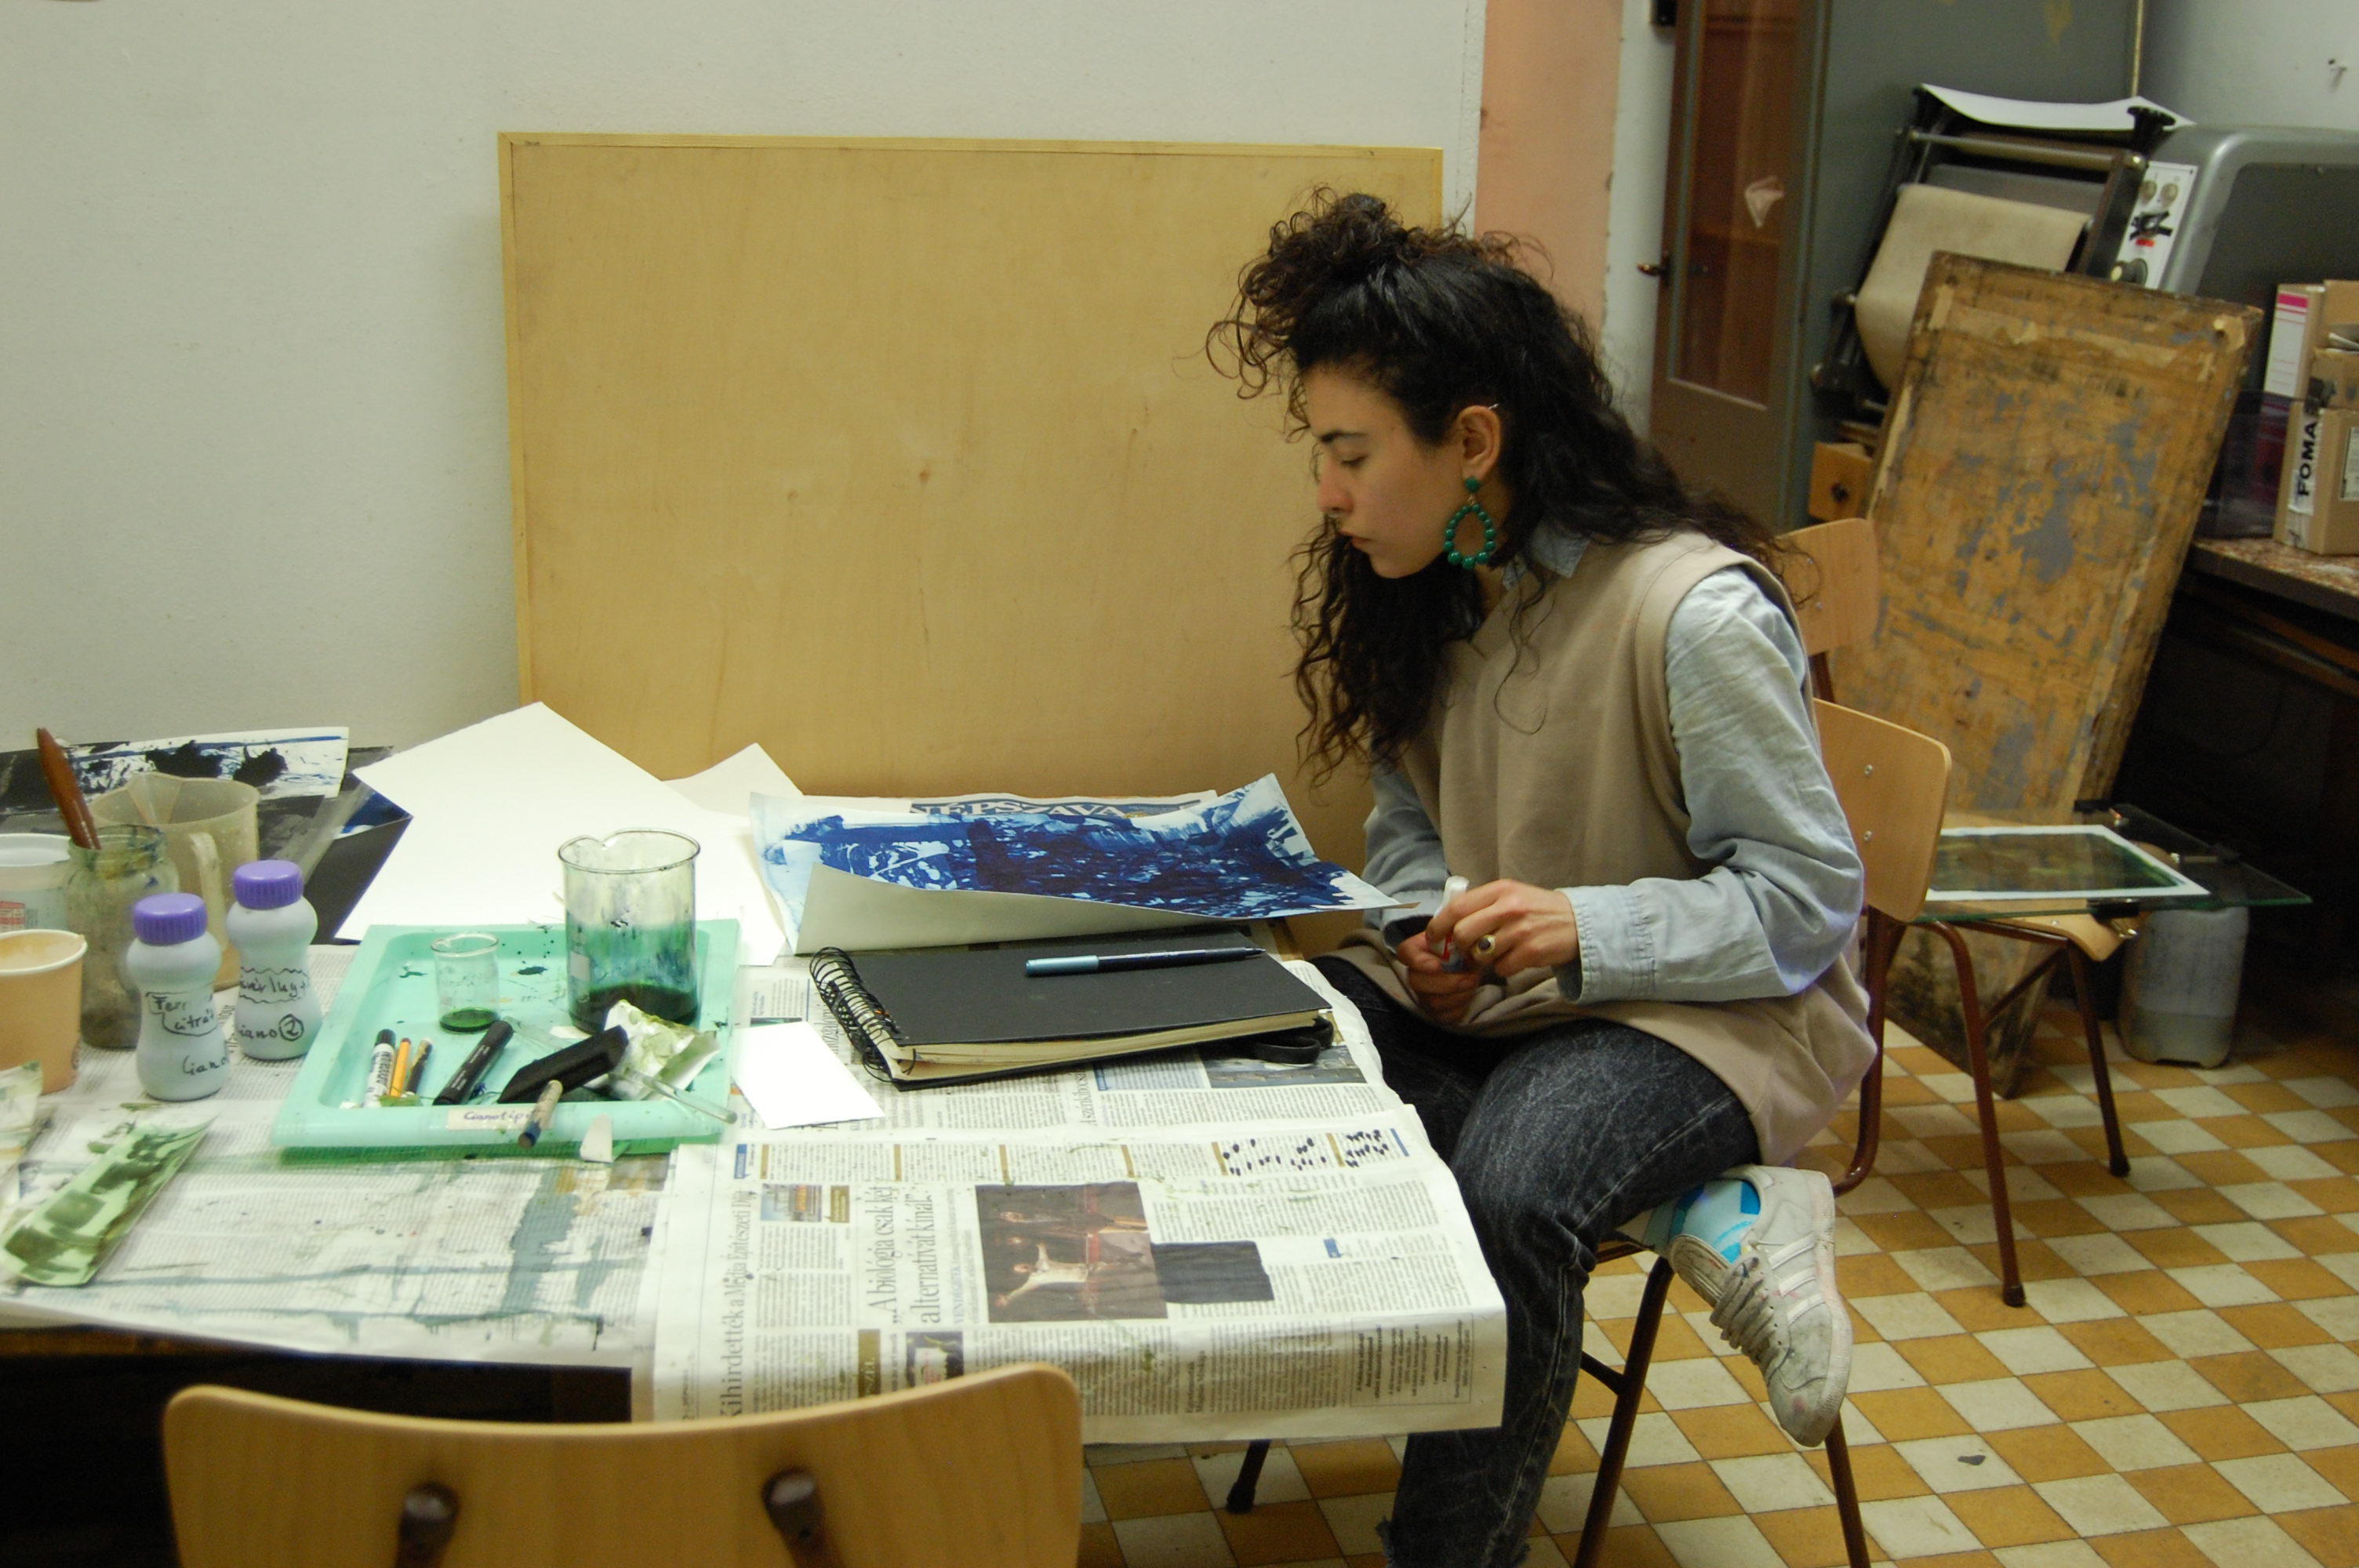 Express Graphic Design course and workshop for students from sister universities in the framework of EU4ART